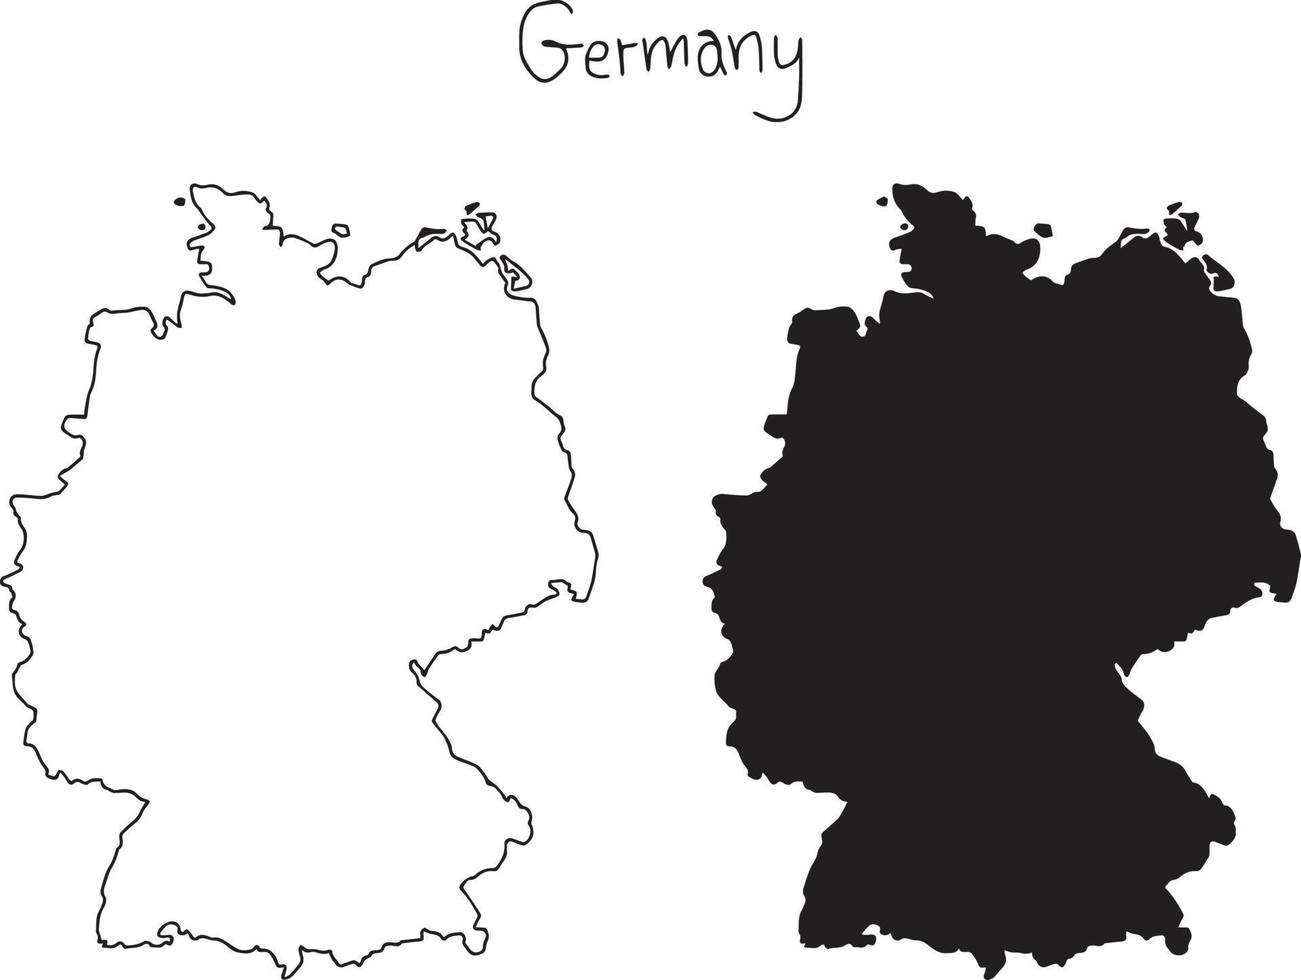 outline and silhouette map of Germany - vector illustration